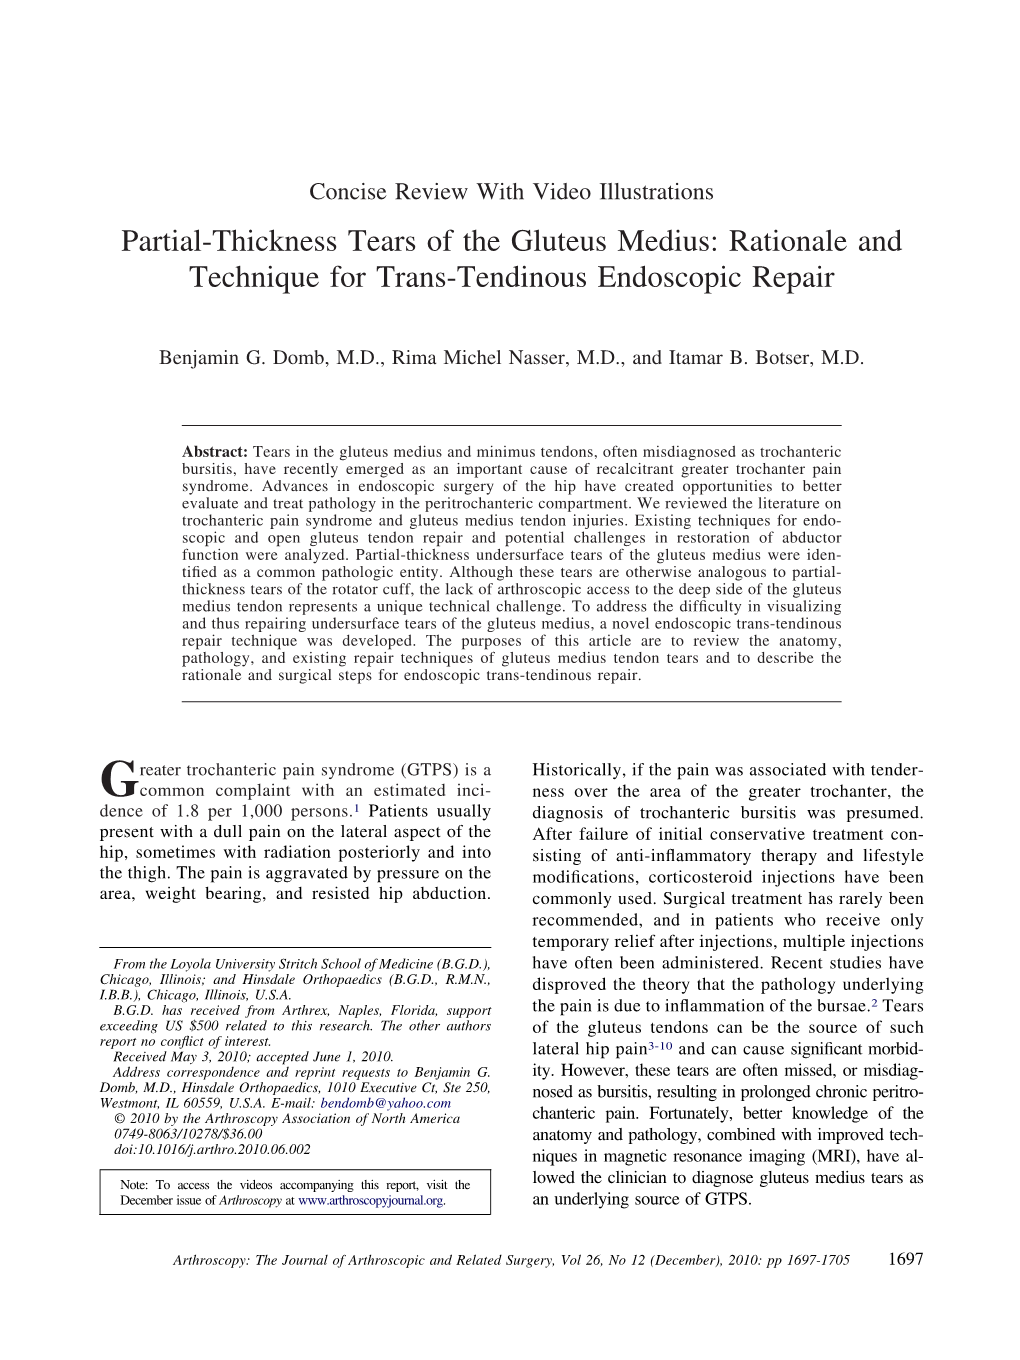 Partial-Thickness Tears of the Gluteus Medius: Rationale and Technique for Trans-Tendinous Endoscopic Repair